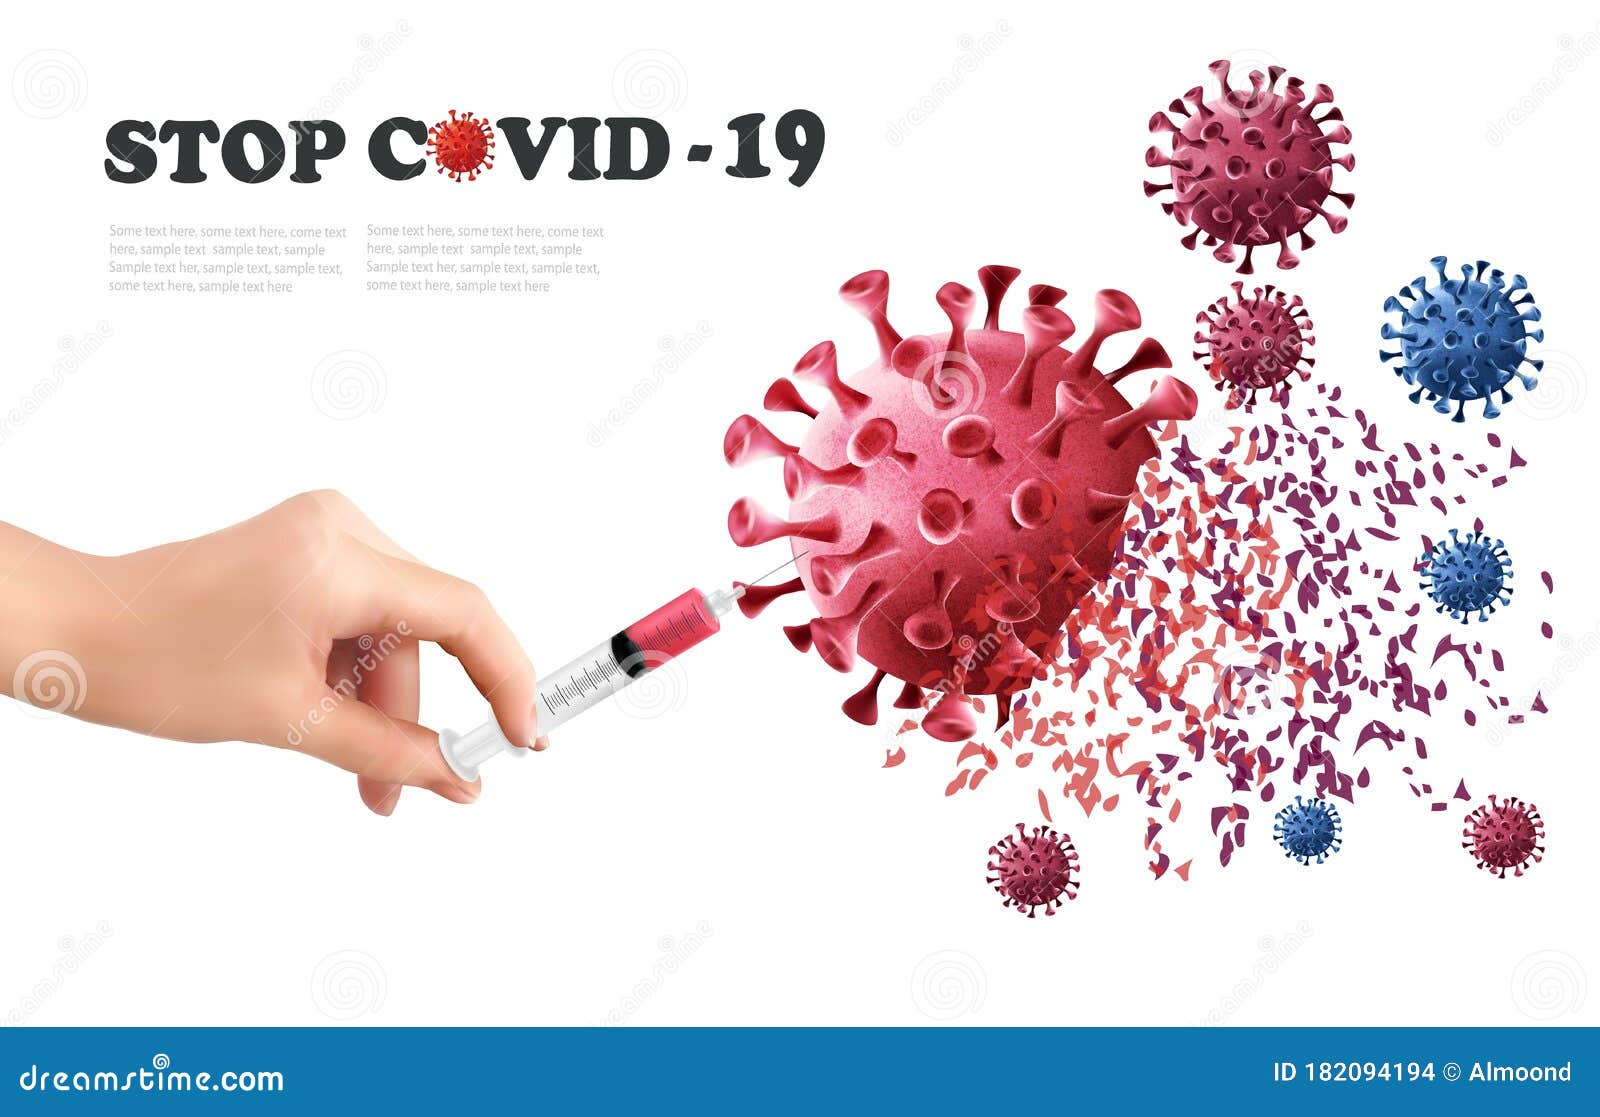 coranavirus concept background. hand holding syringe with vaccine destroying virus covid - 19